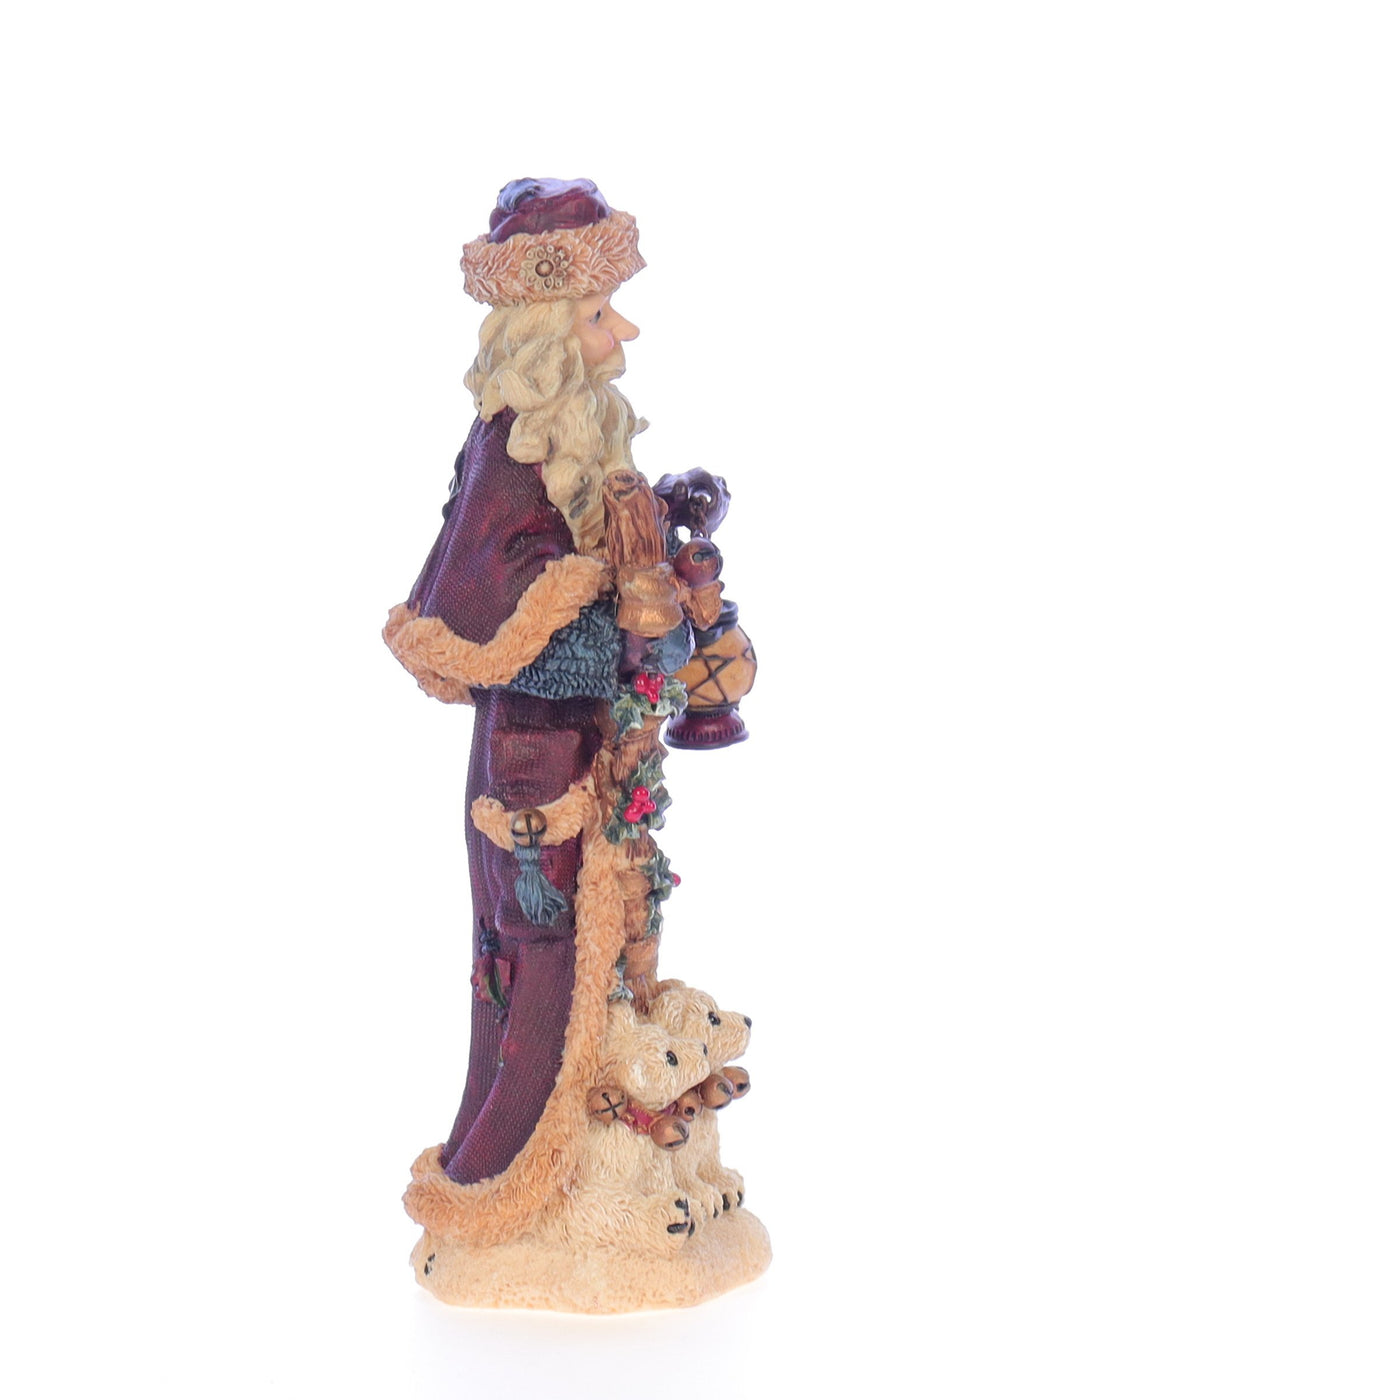 Boyds_Bears_Folkstone_Resin_Figurine_St_Nick_The_Quest_2808_07